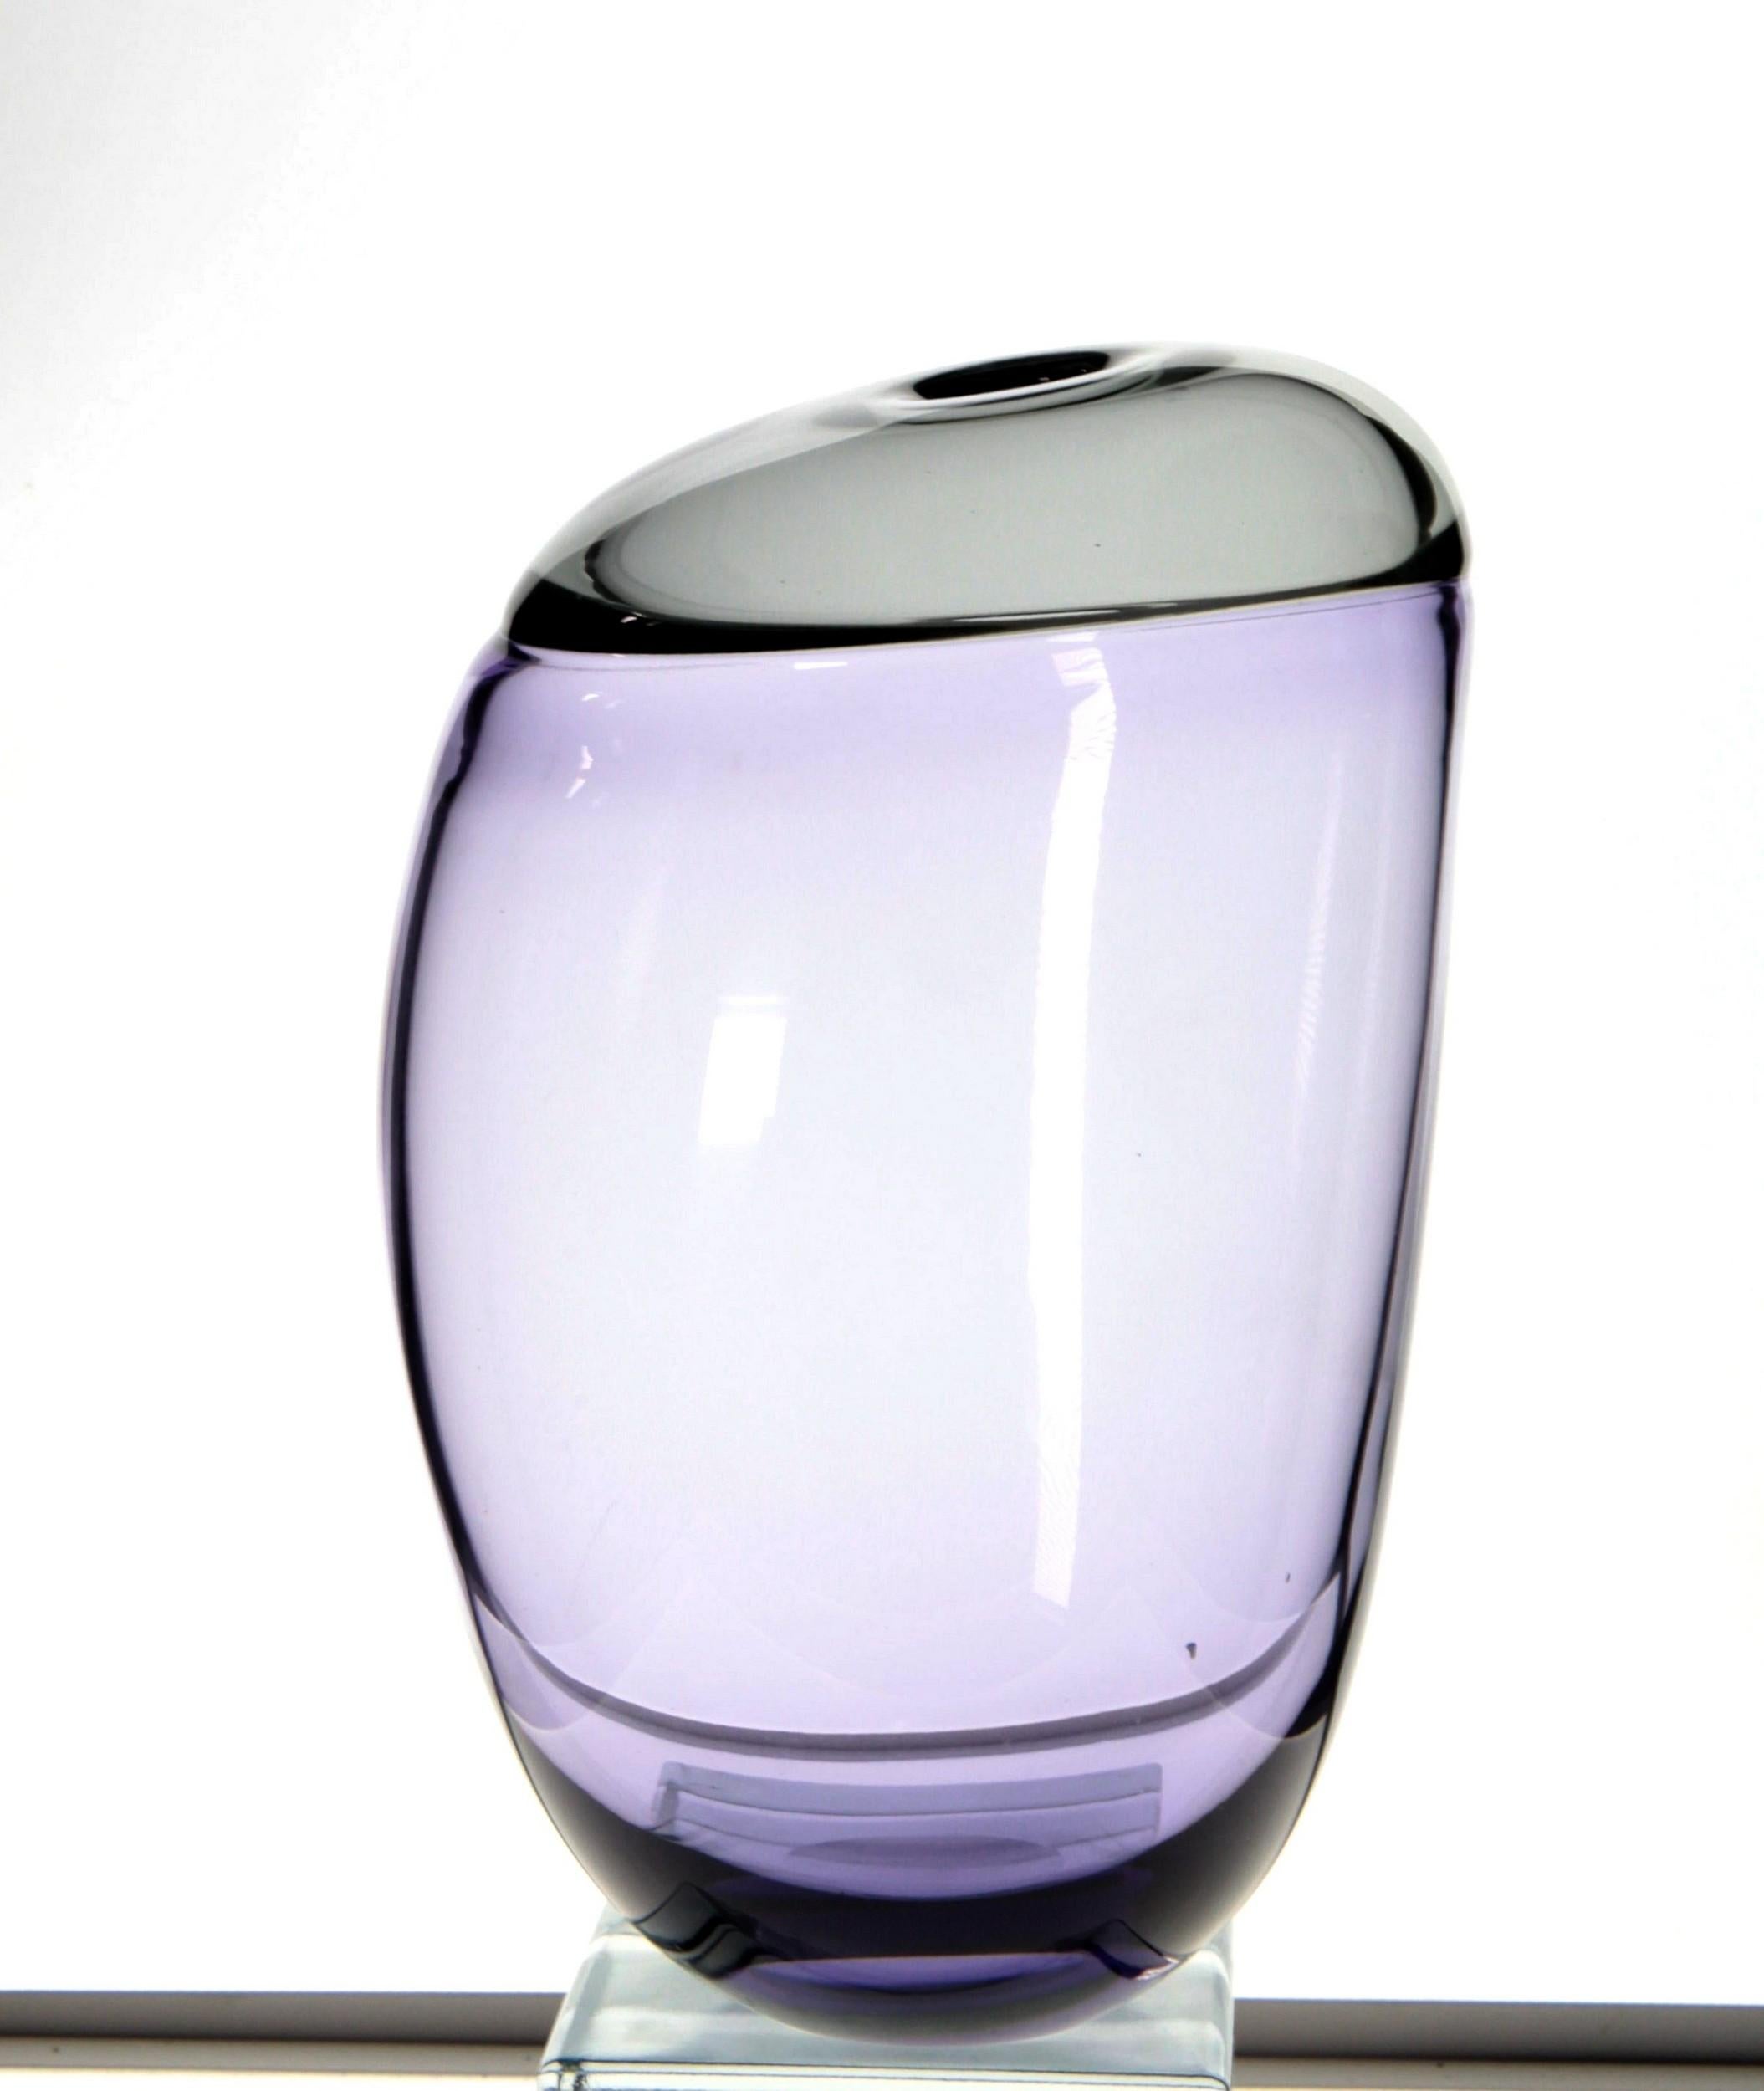 Paolo Crepax asimmetrico vase. The vase made of two separate parts joined together called incalmo. The main part is in a beautiful amethyst, the upper part is in Grigio Acciaio (a warm gray). 

Paolo is famous for his ability with the incalmo